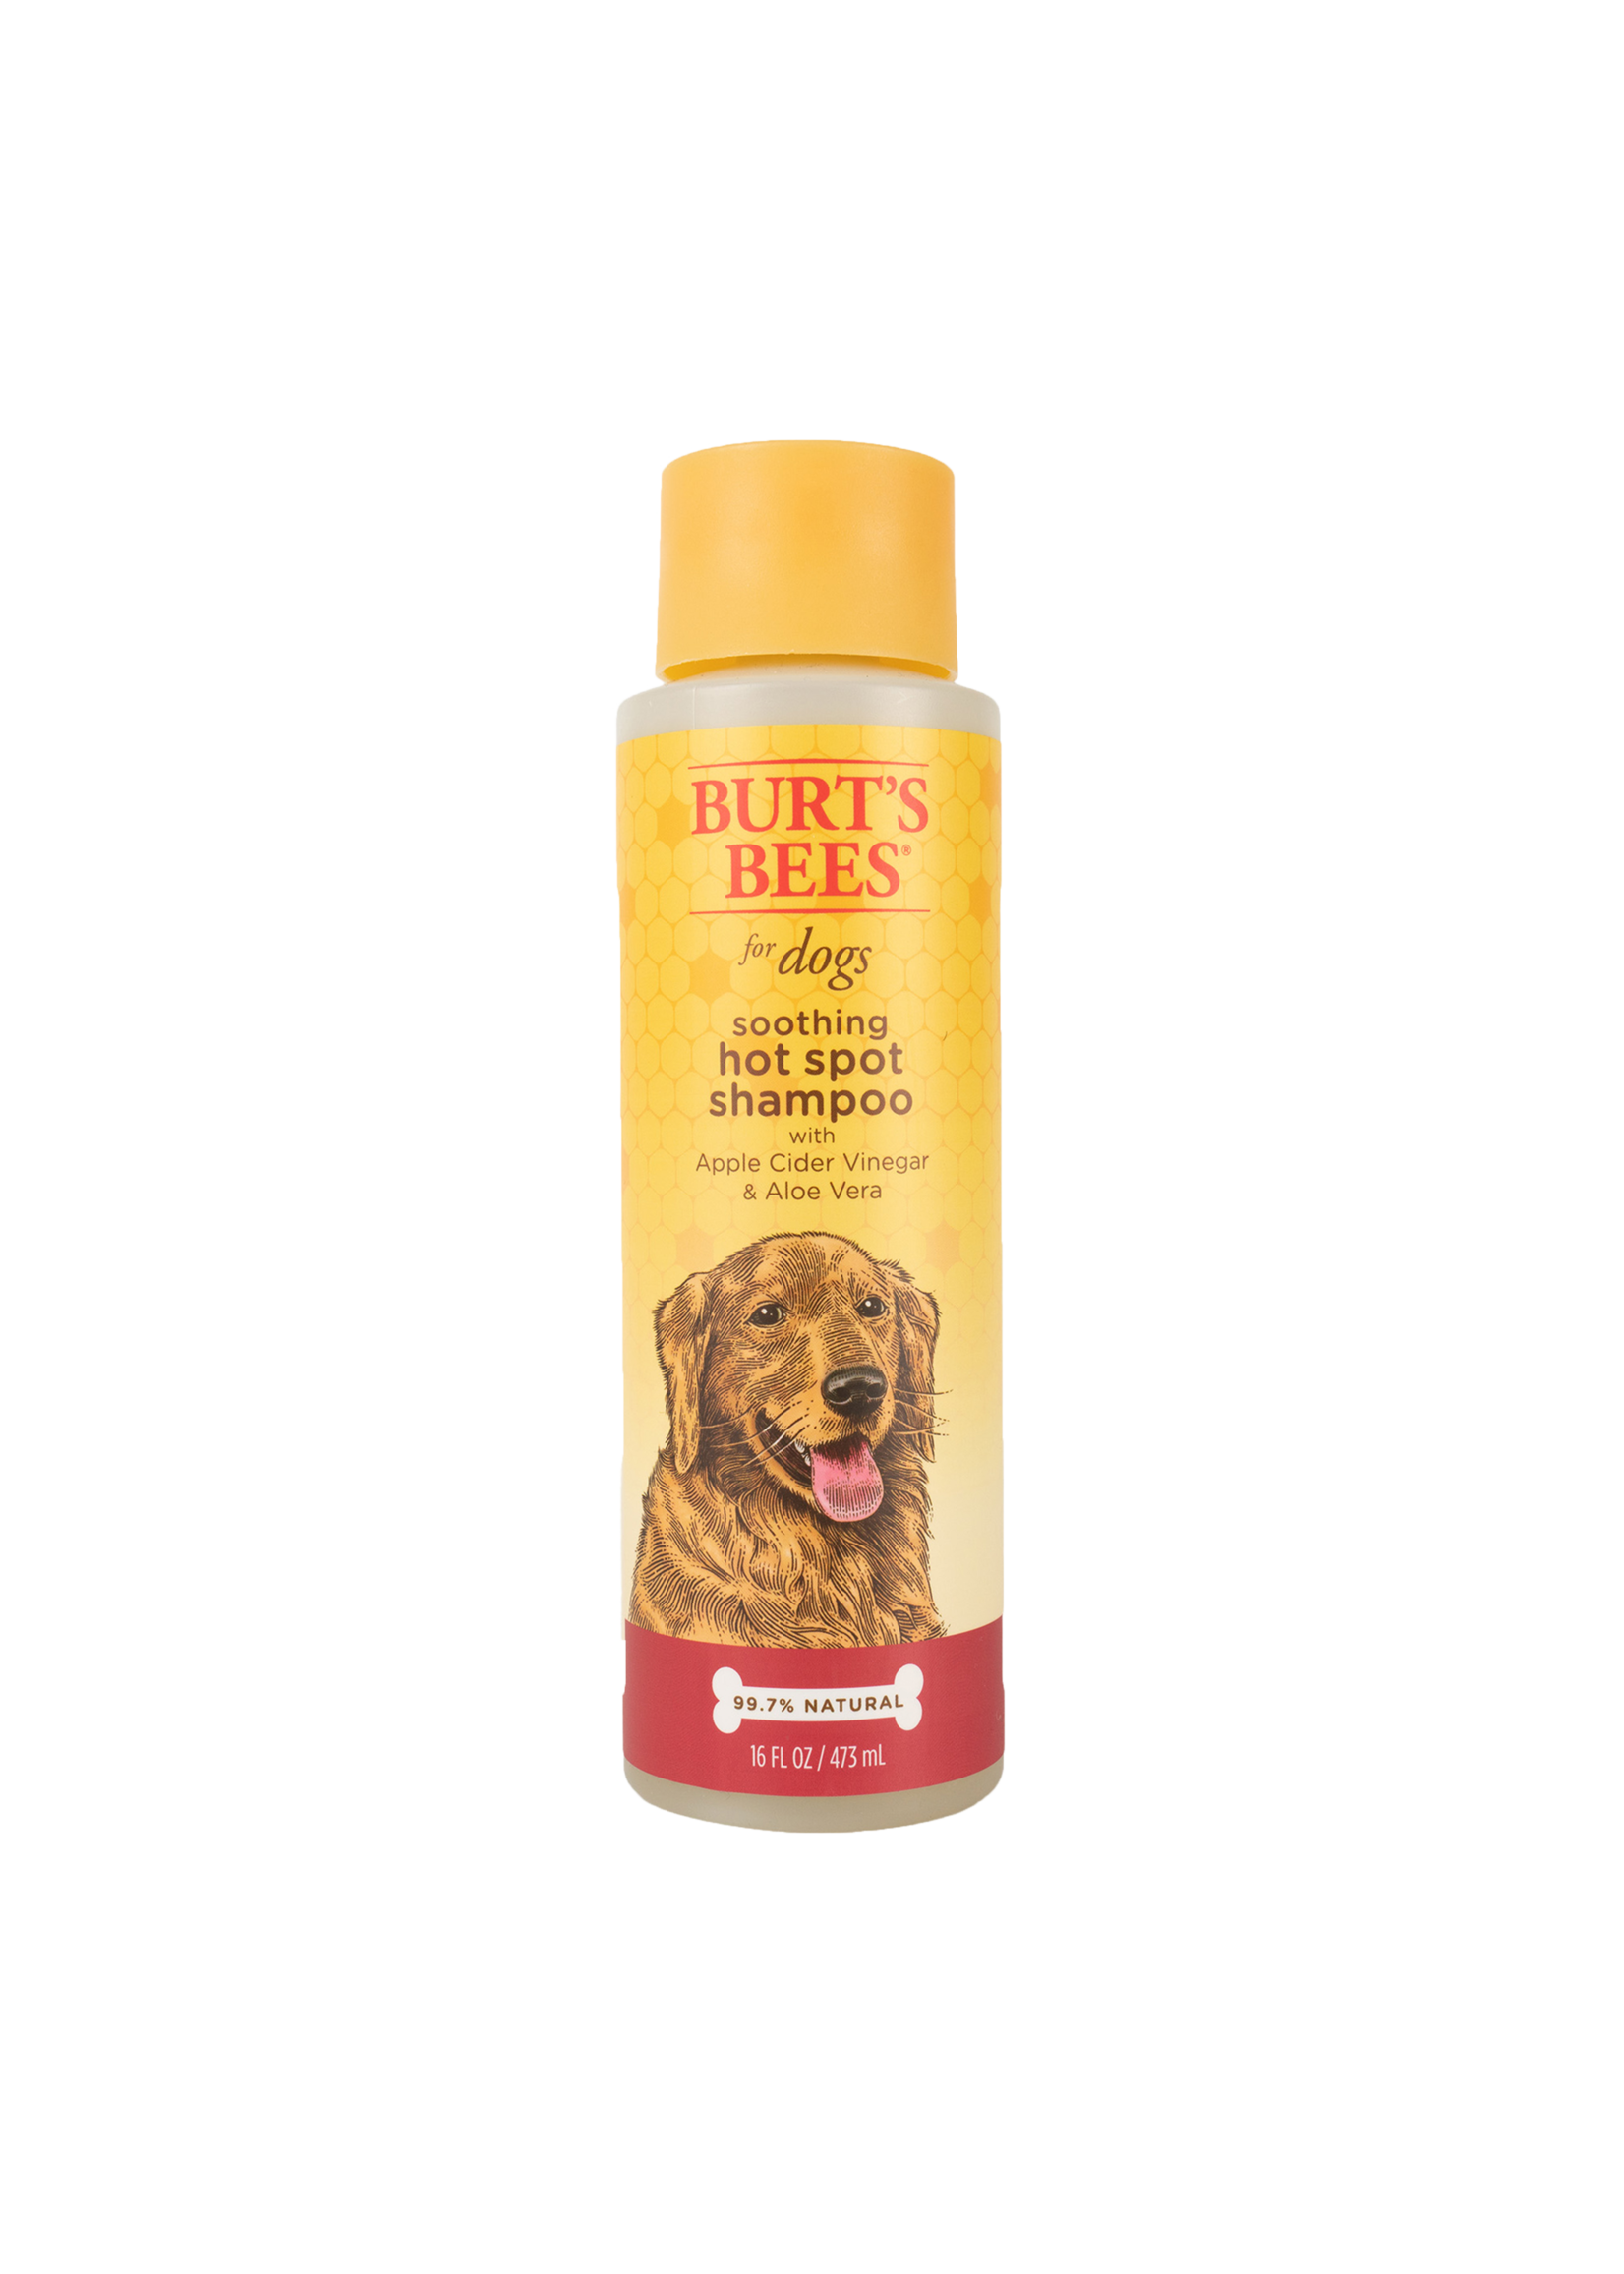 Burt's Bees Soothing Hot Spot Shampoo for Dogs, 16 oz.